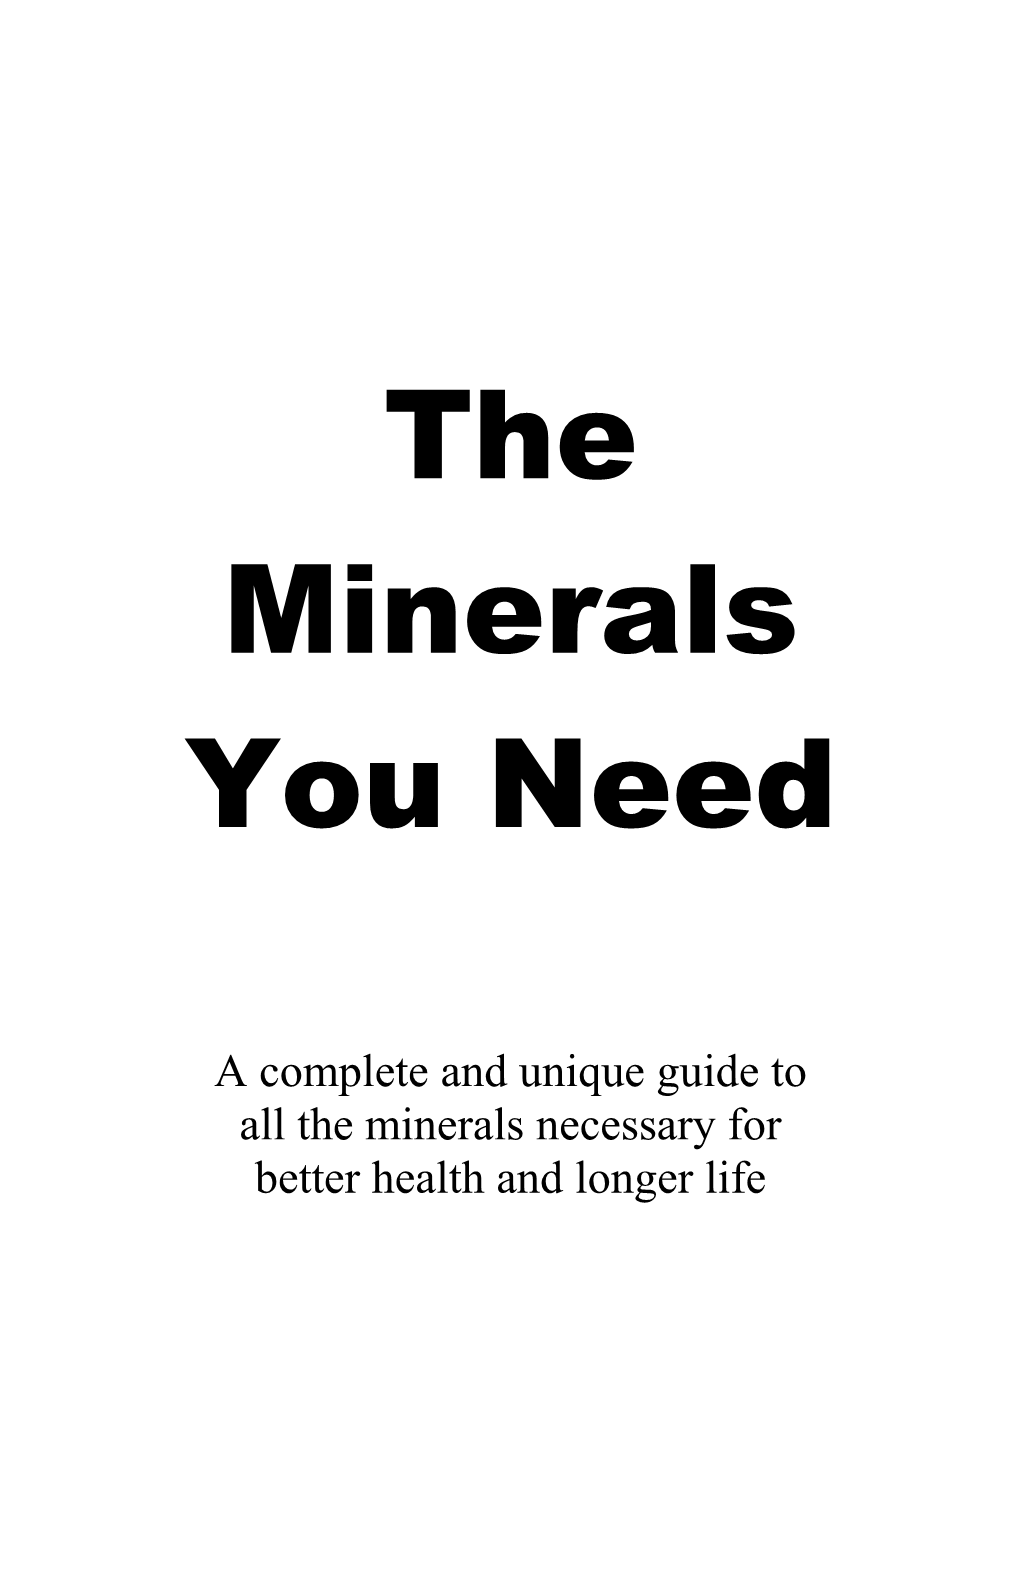 The Minerals You Need